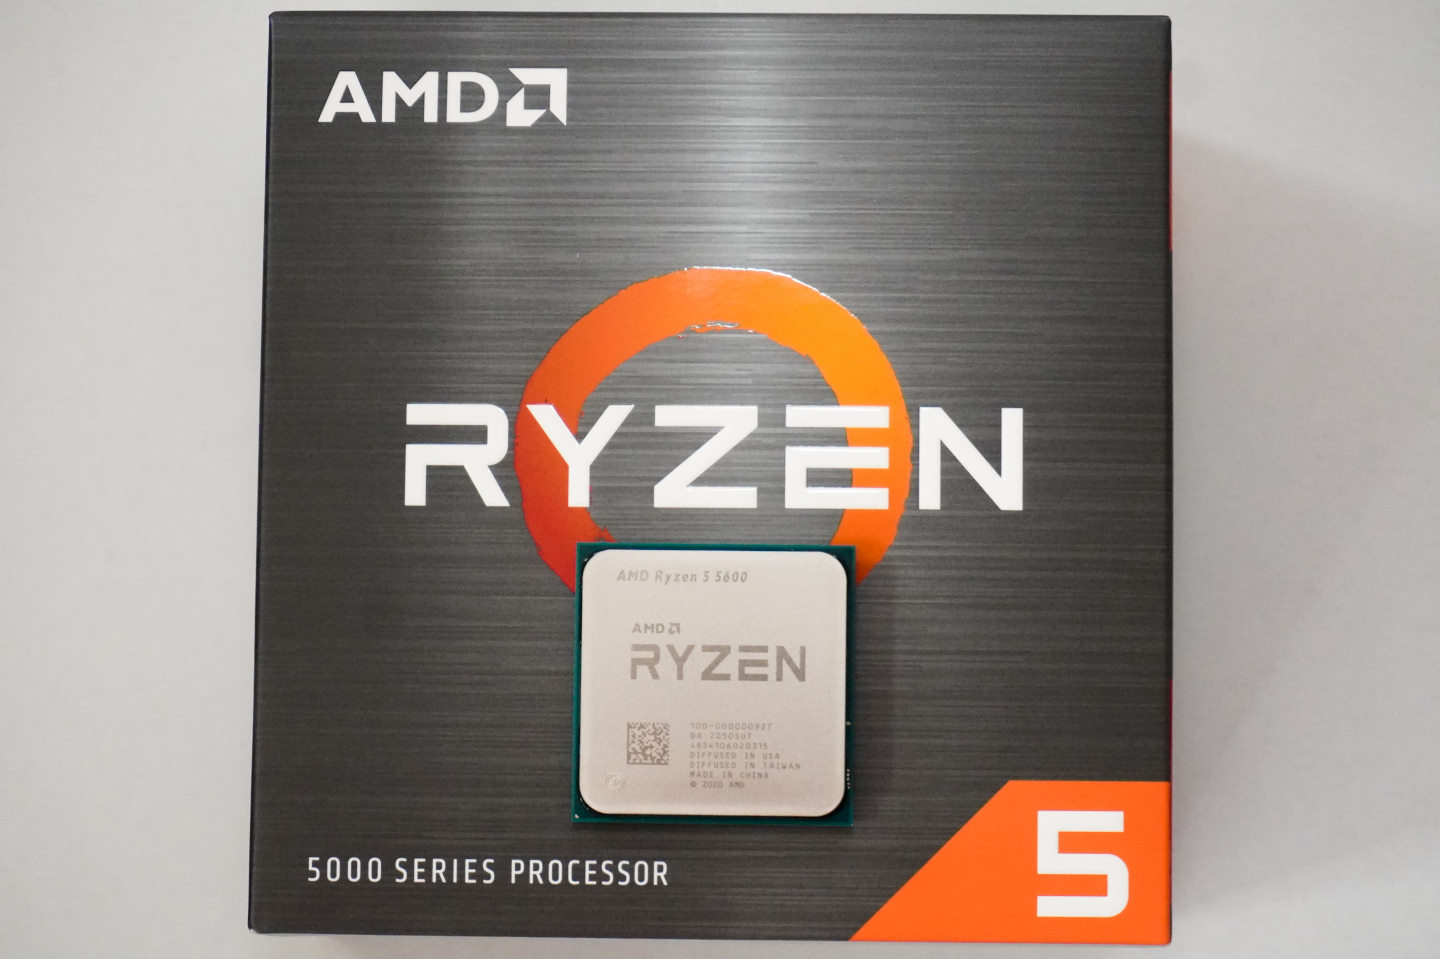 The Ryzen 5 5600's specs are pretty close to the Ryzen 5 5600X, but the price is a bit off.